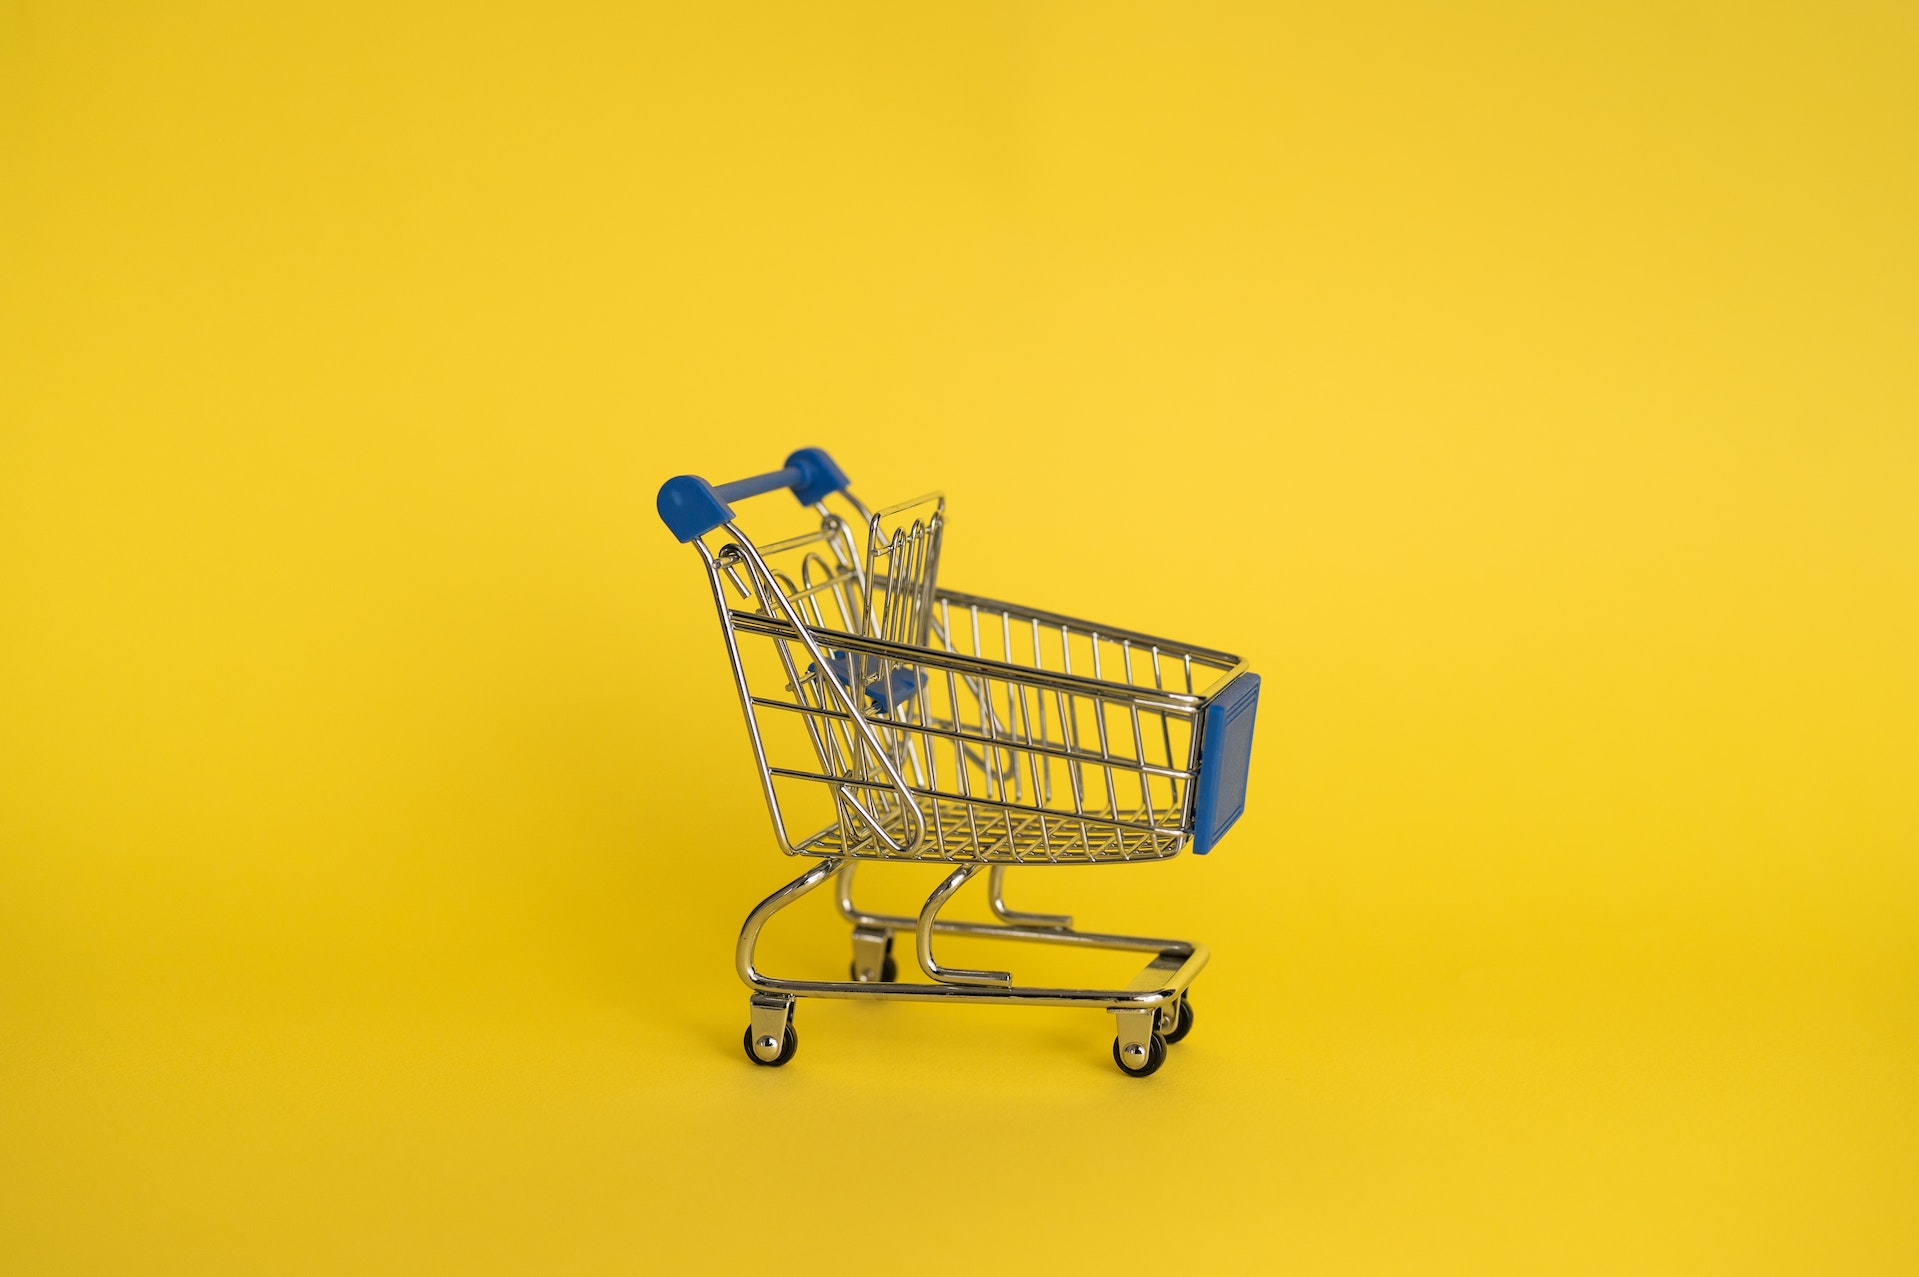 Small shopping cart in front of yellow background